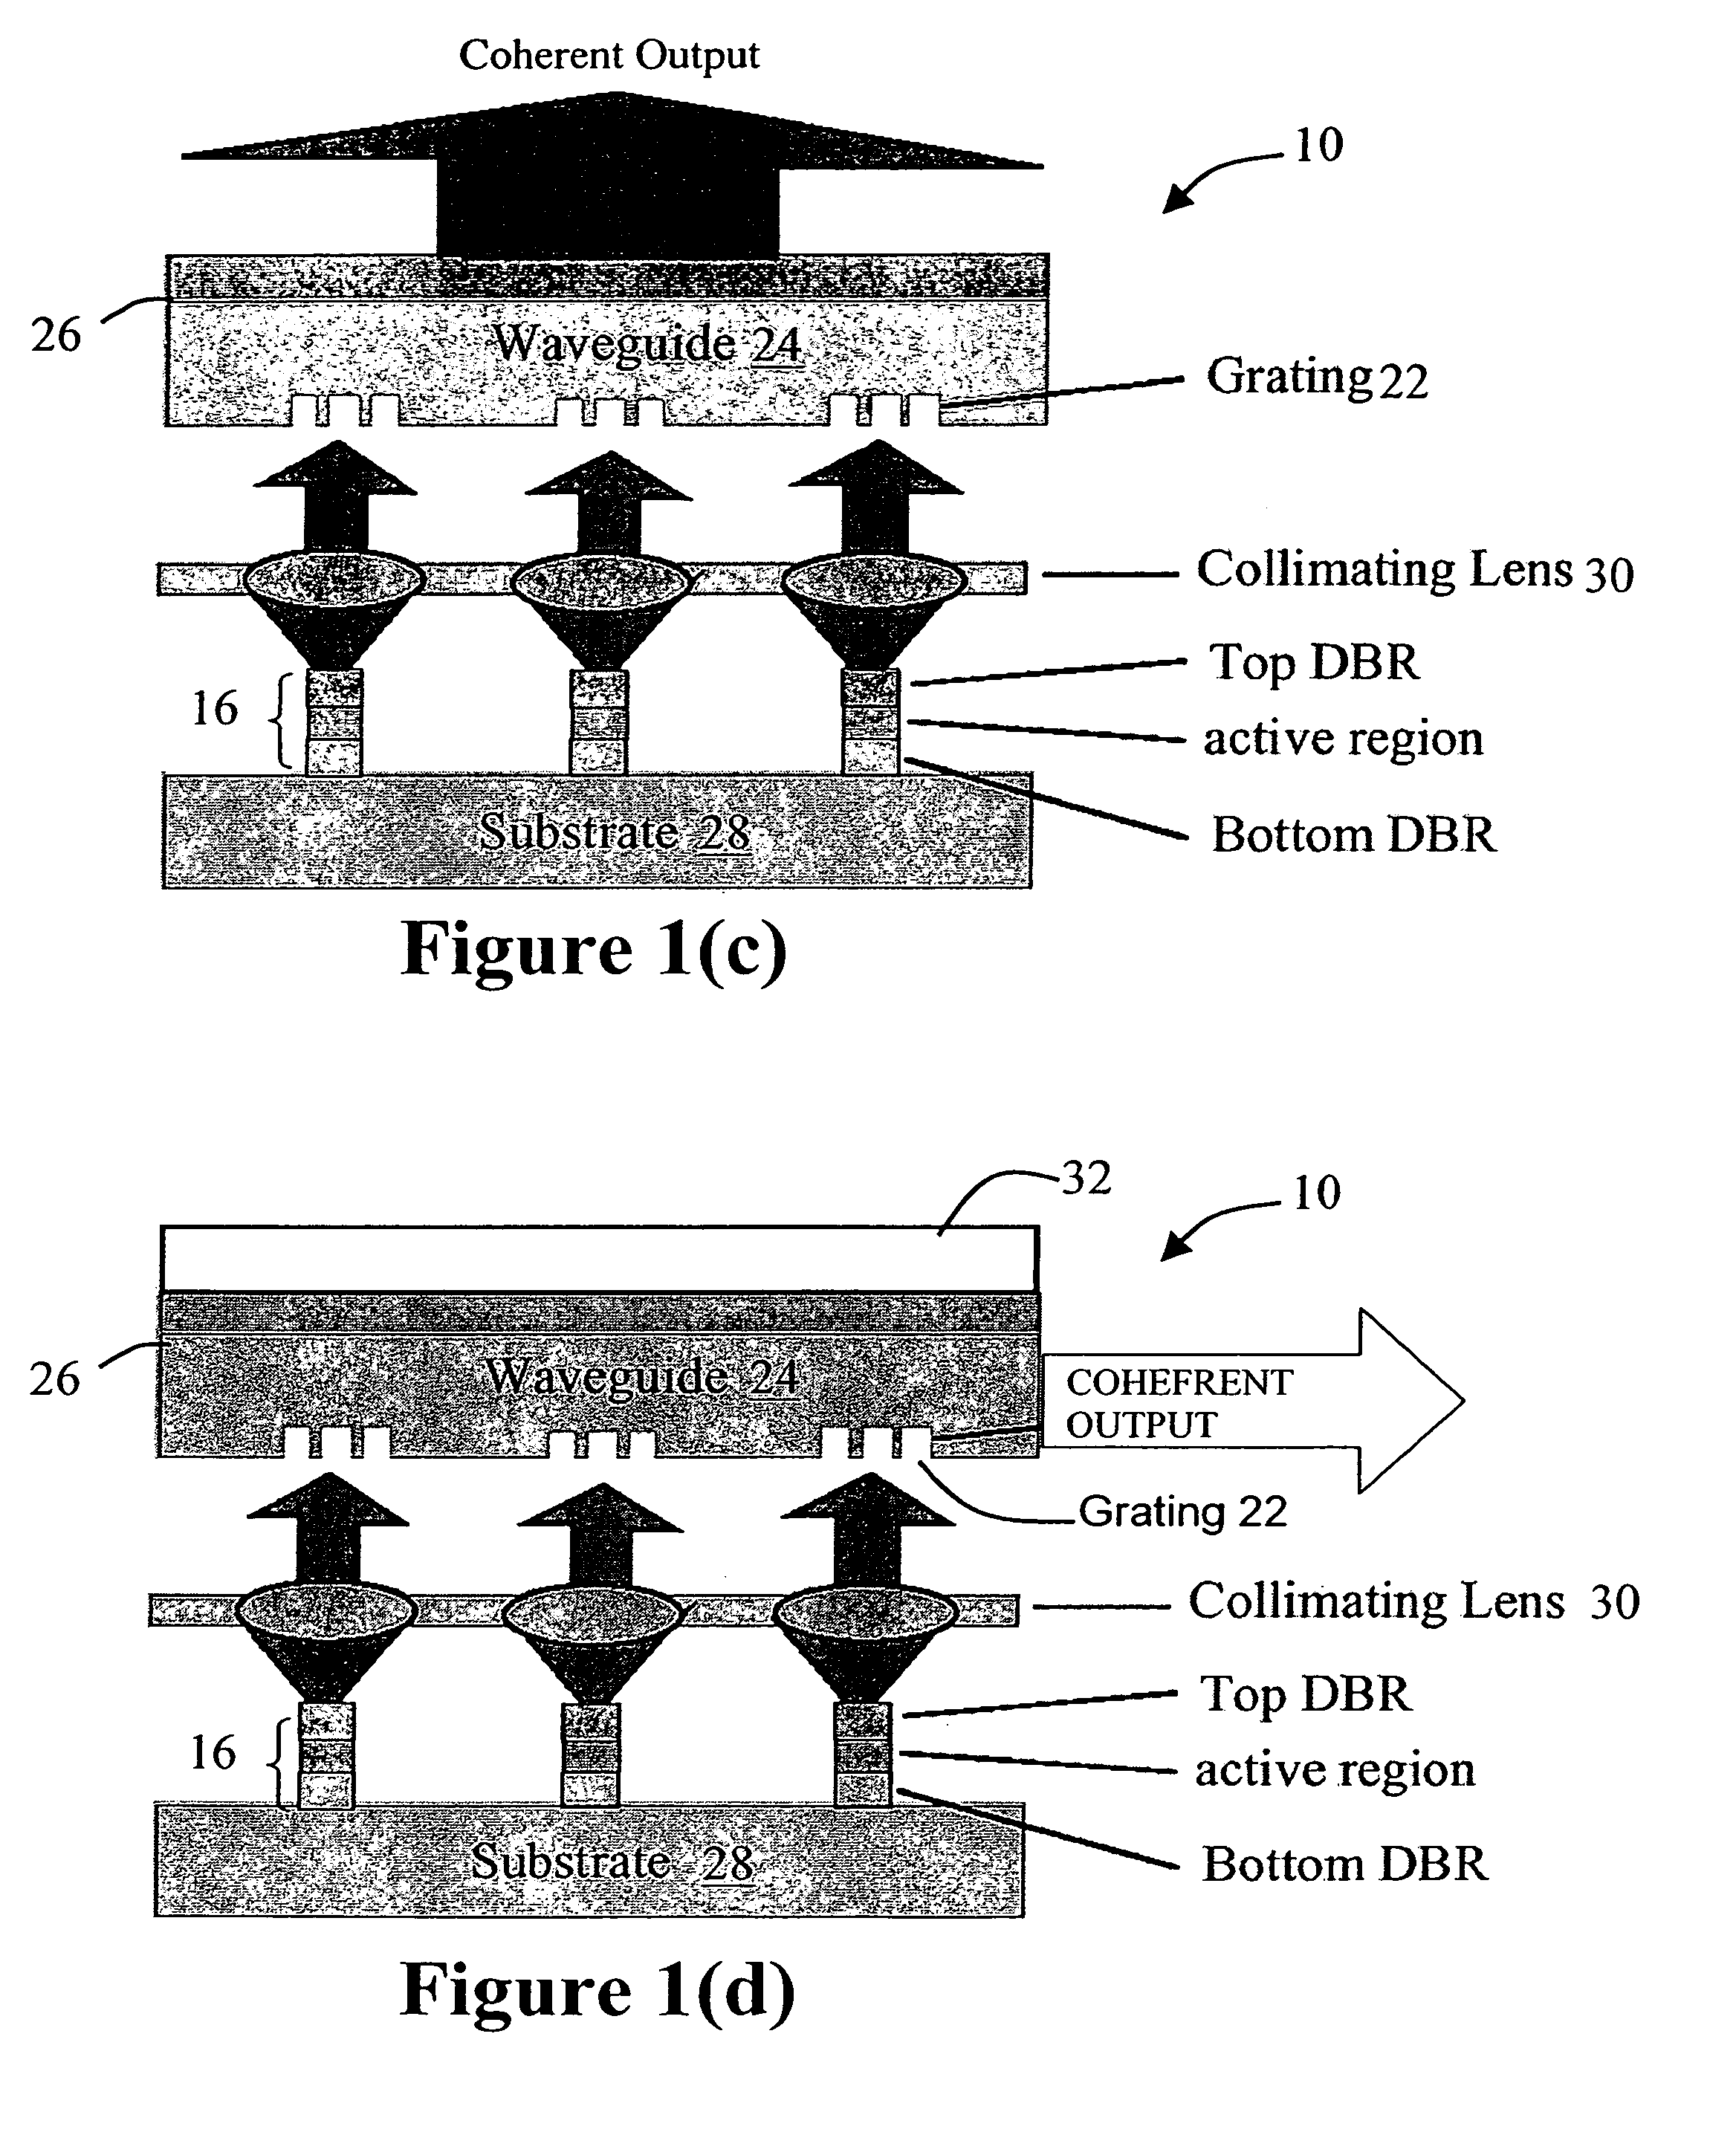 High-power coherent arrays of vertical cavity surface emitting lasers